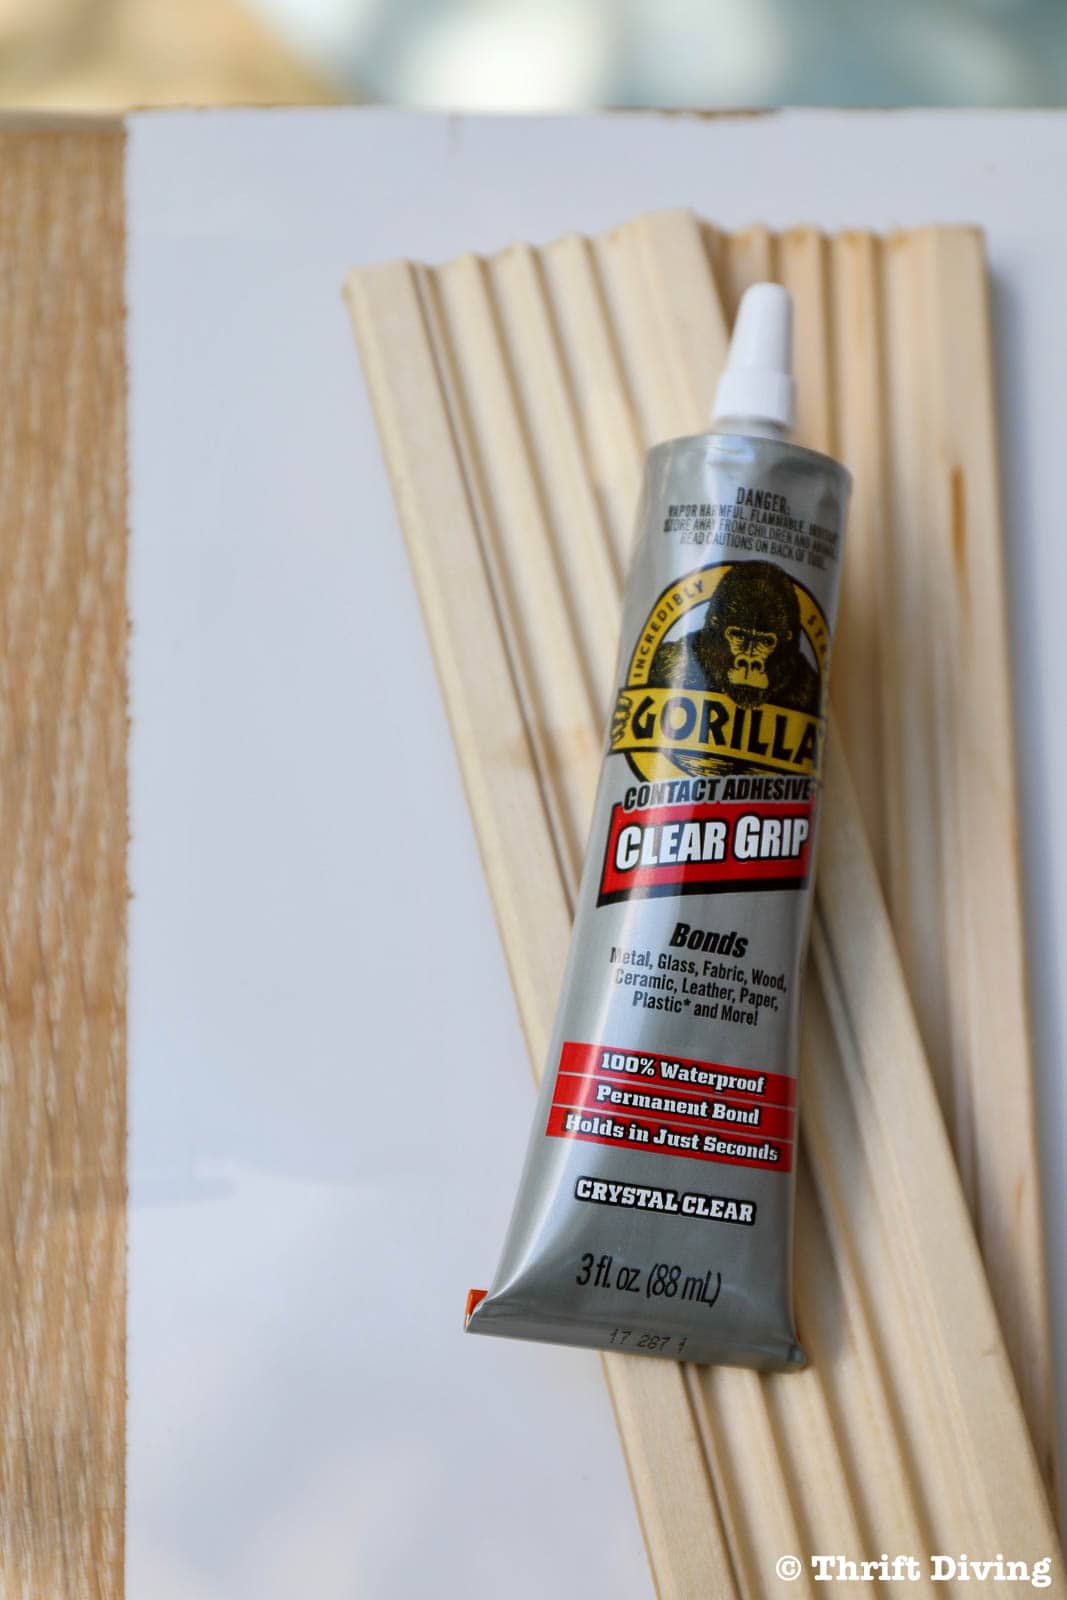 How to Make a Big DIY Whiteboard - Gorilla Clear Grip will easily adhere the trim quickly. - Thrift Diving